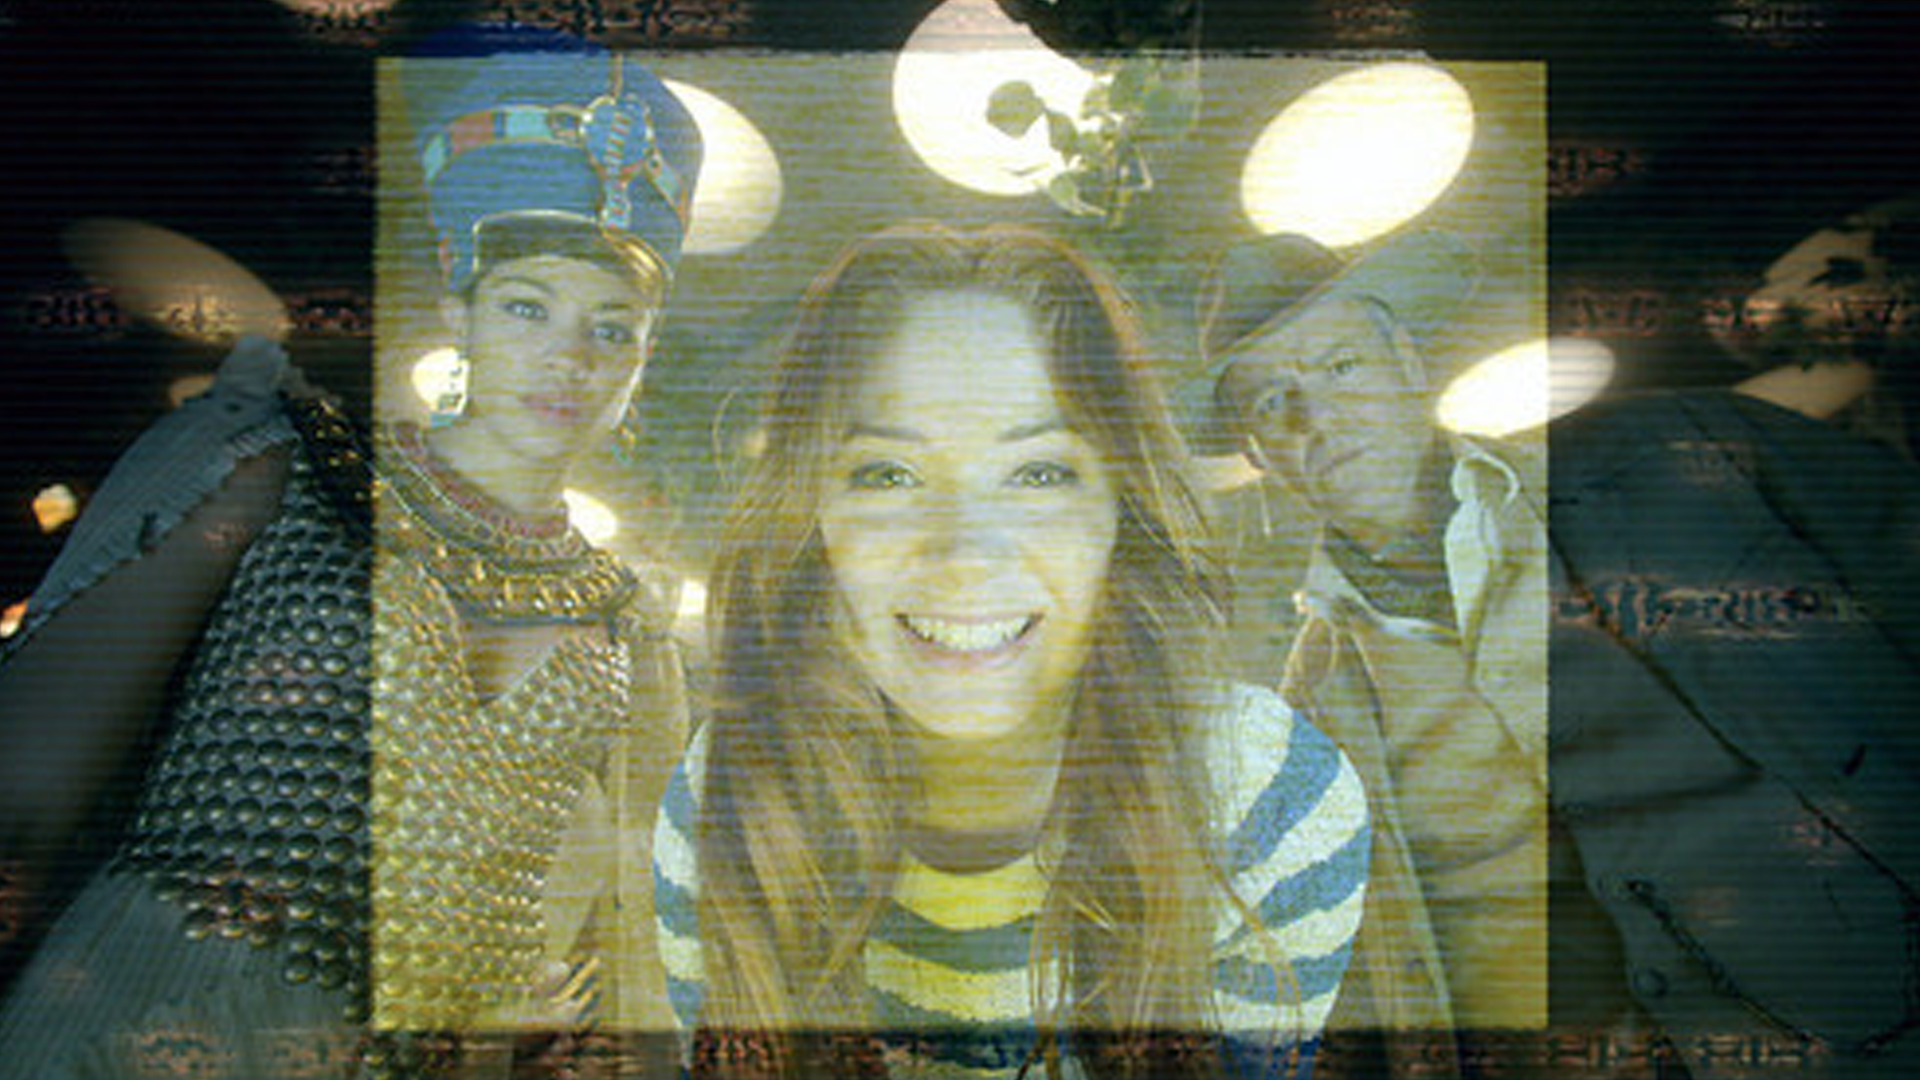 Amy Pond looking into a computer screen on a spaceship feat. Queen Nefertiti and John Riddell